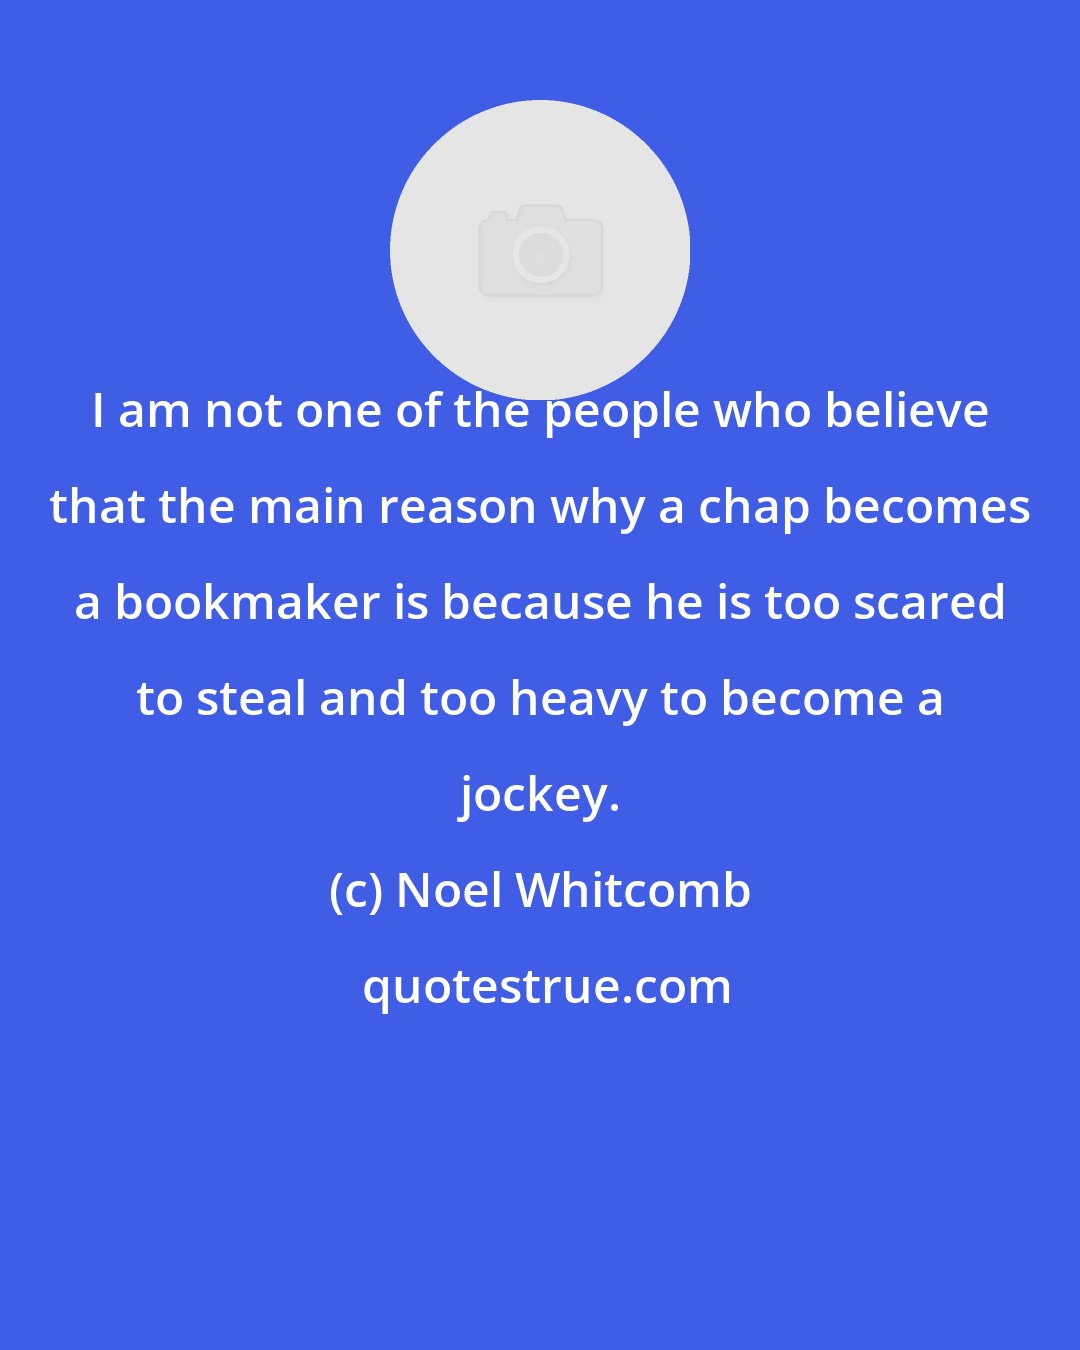 Noel Whitcomb: I am not one of the people who believe that the main reason why a chap becomes a bookmaker is because he is too scared to steal and too heavy to become a jockey.